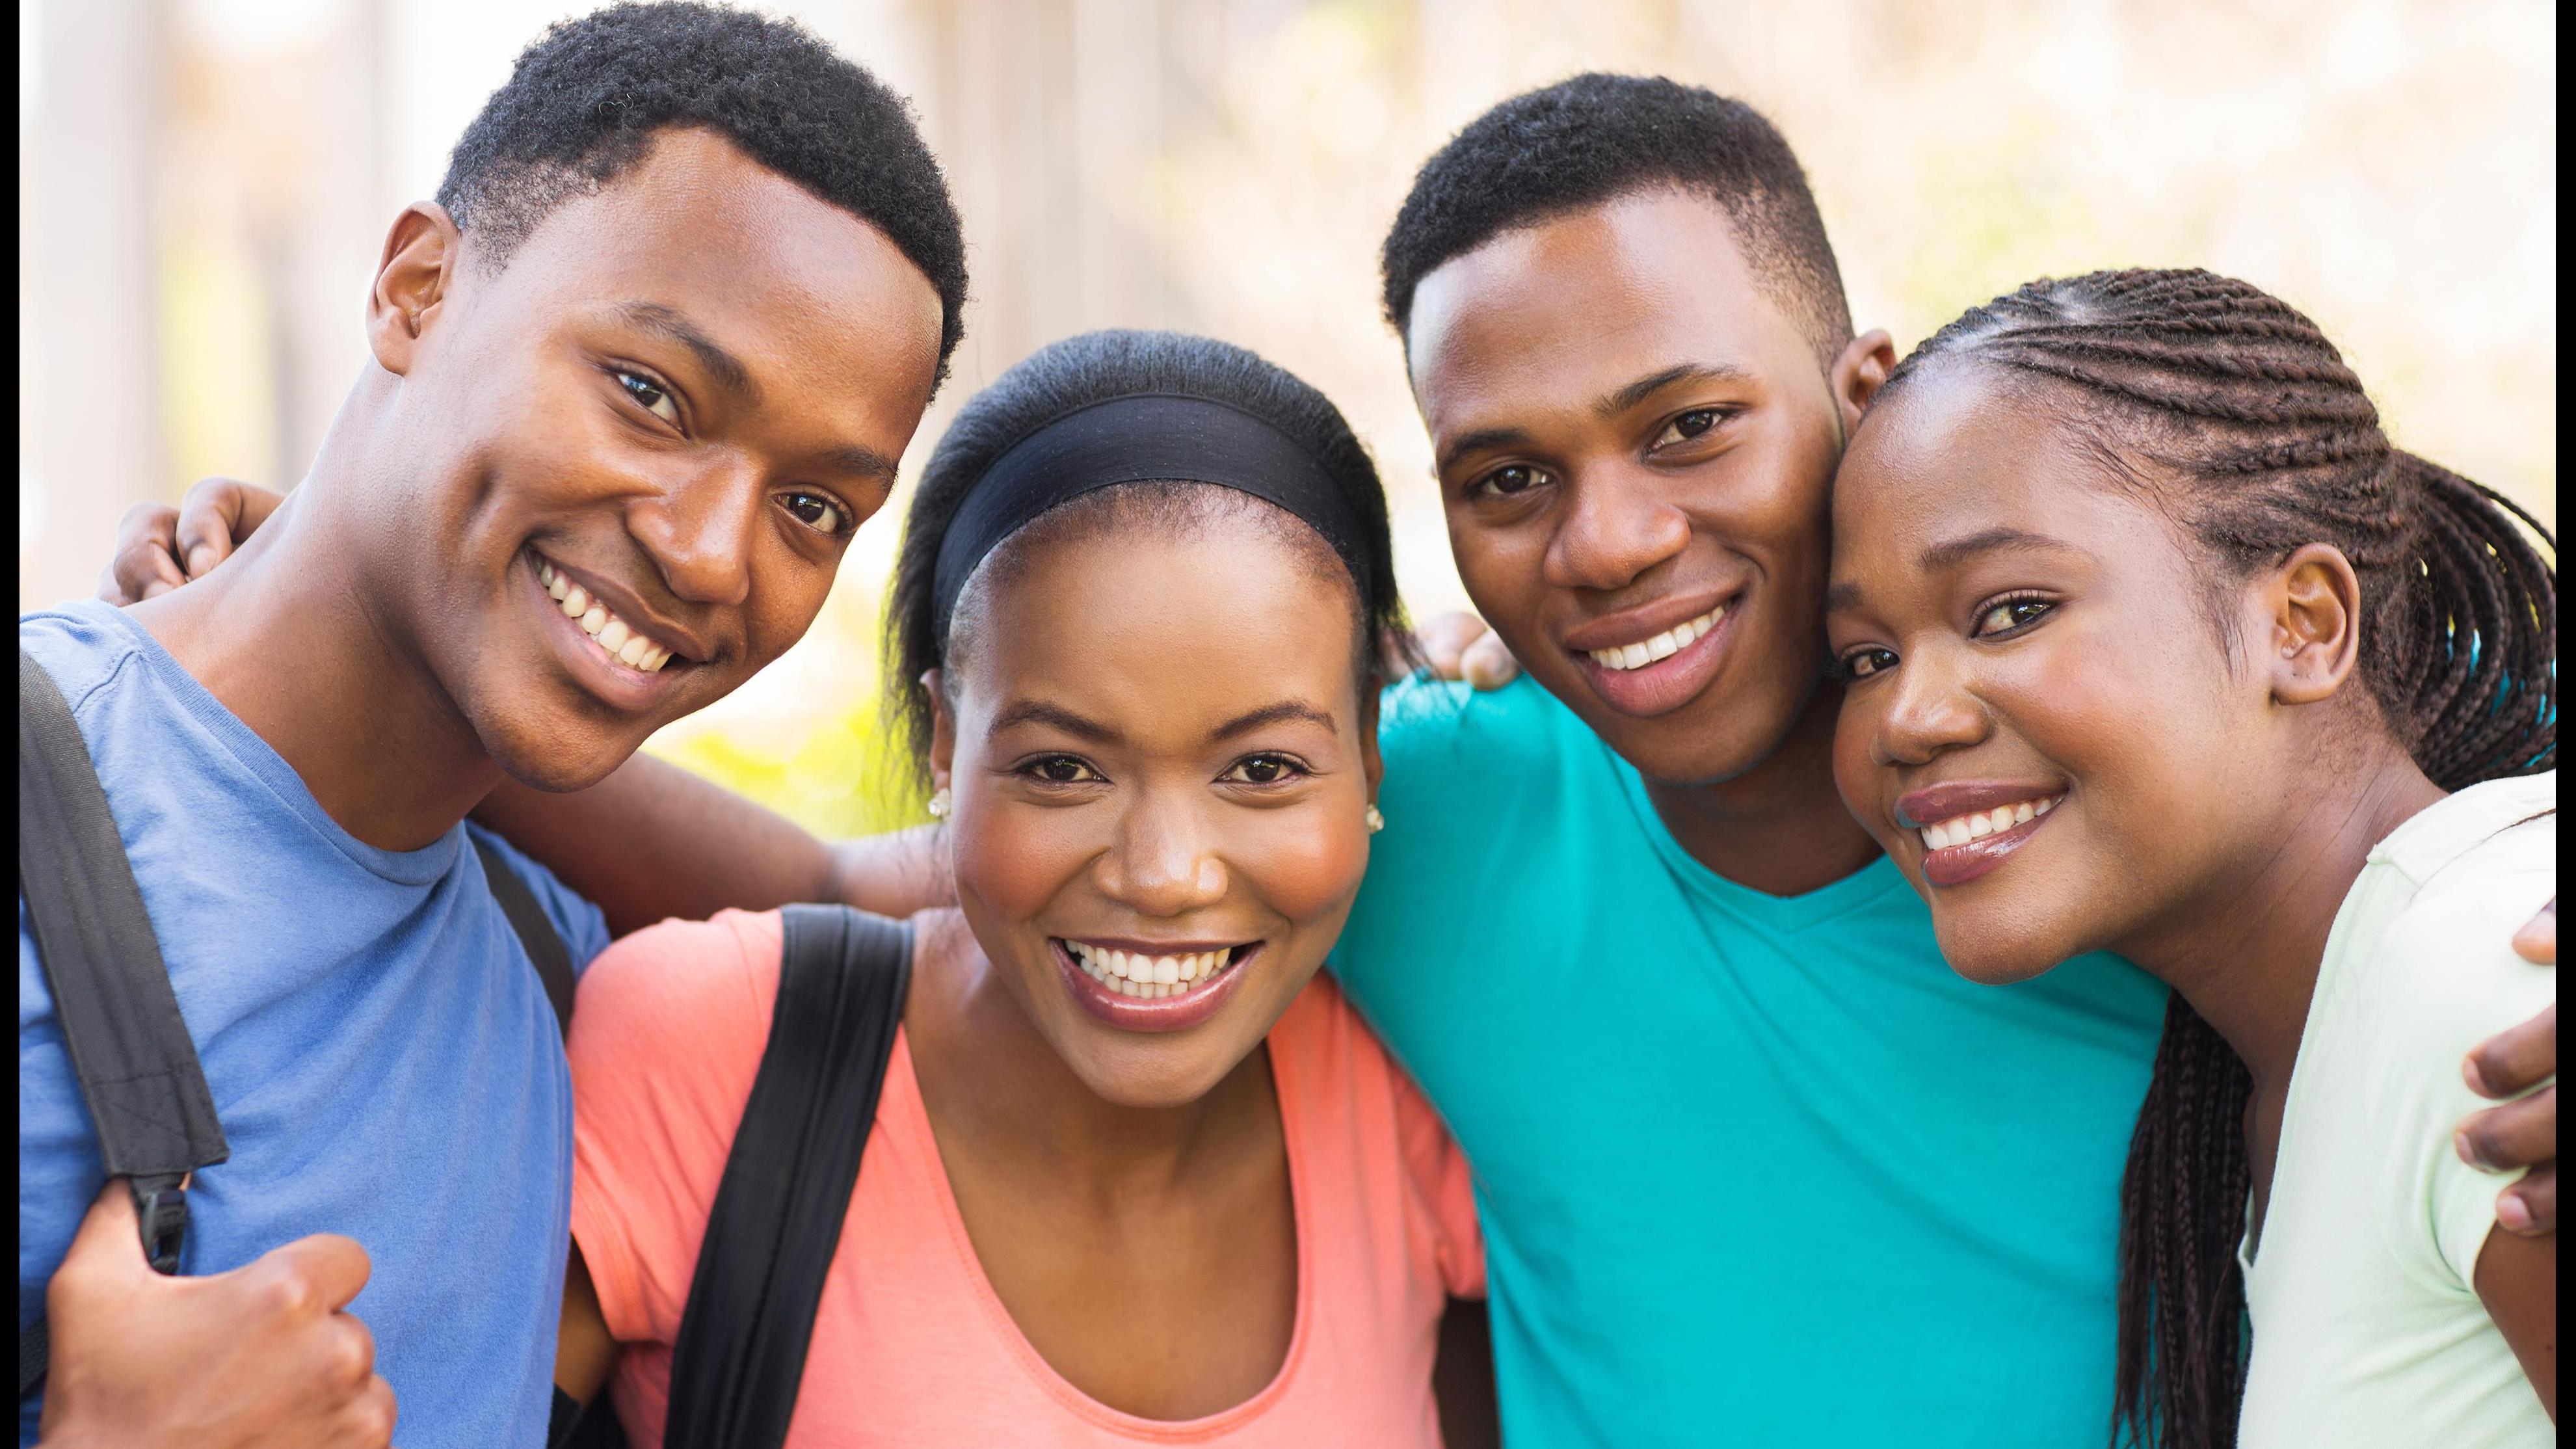 AFRICAN AMERICAN TEENS NEEDED FOR STUDY ON RACISM, STRESS AND HEALTH